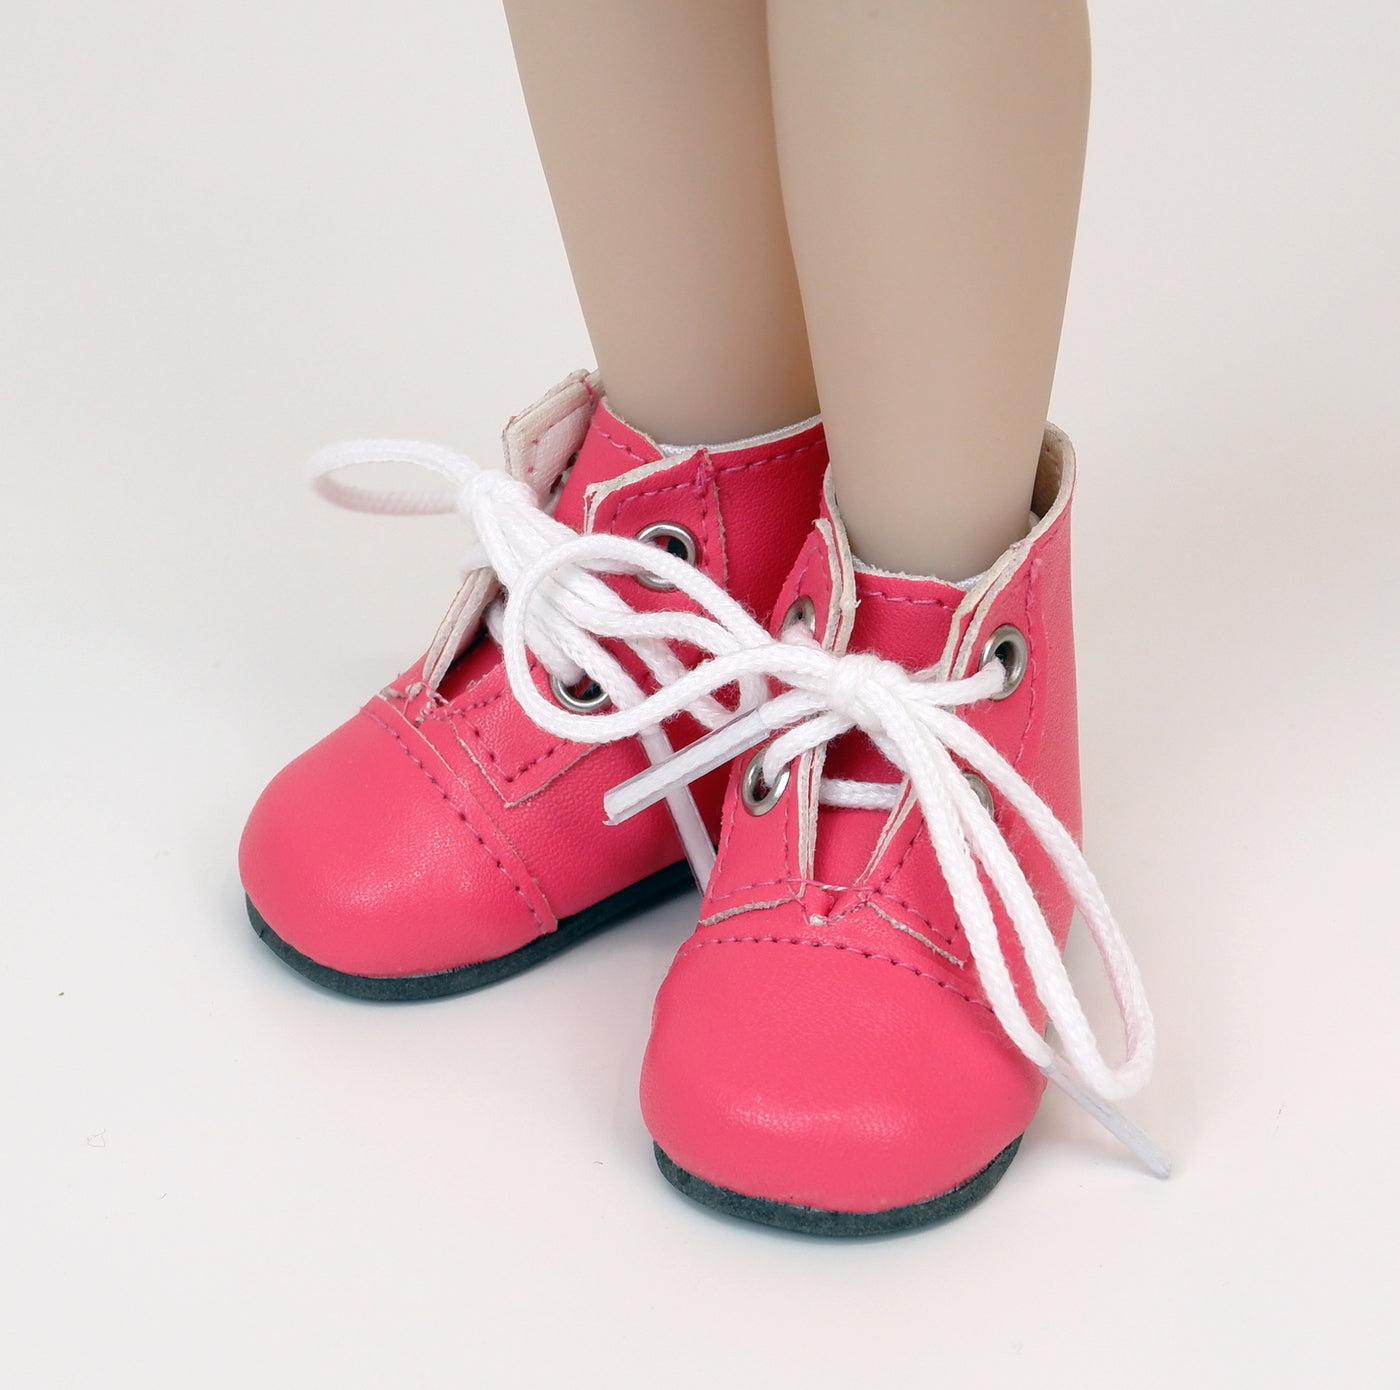 Ankle Lace Up Boots - Coral